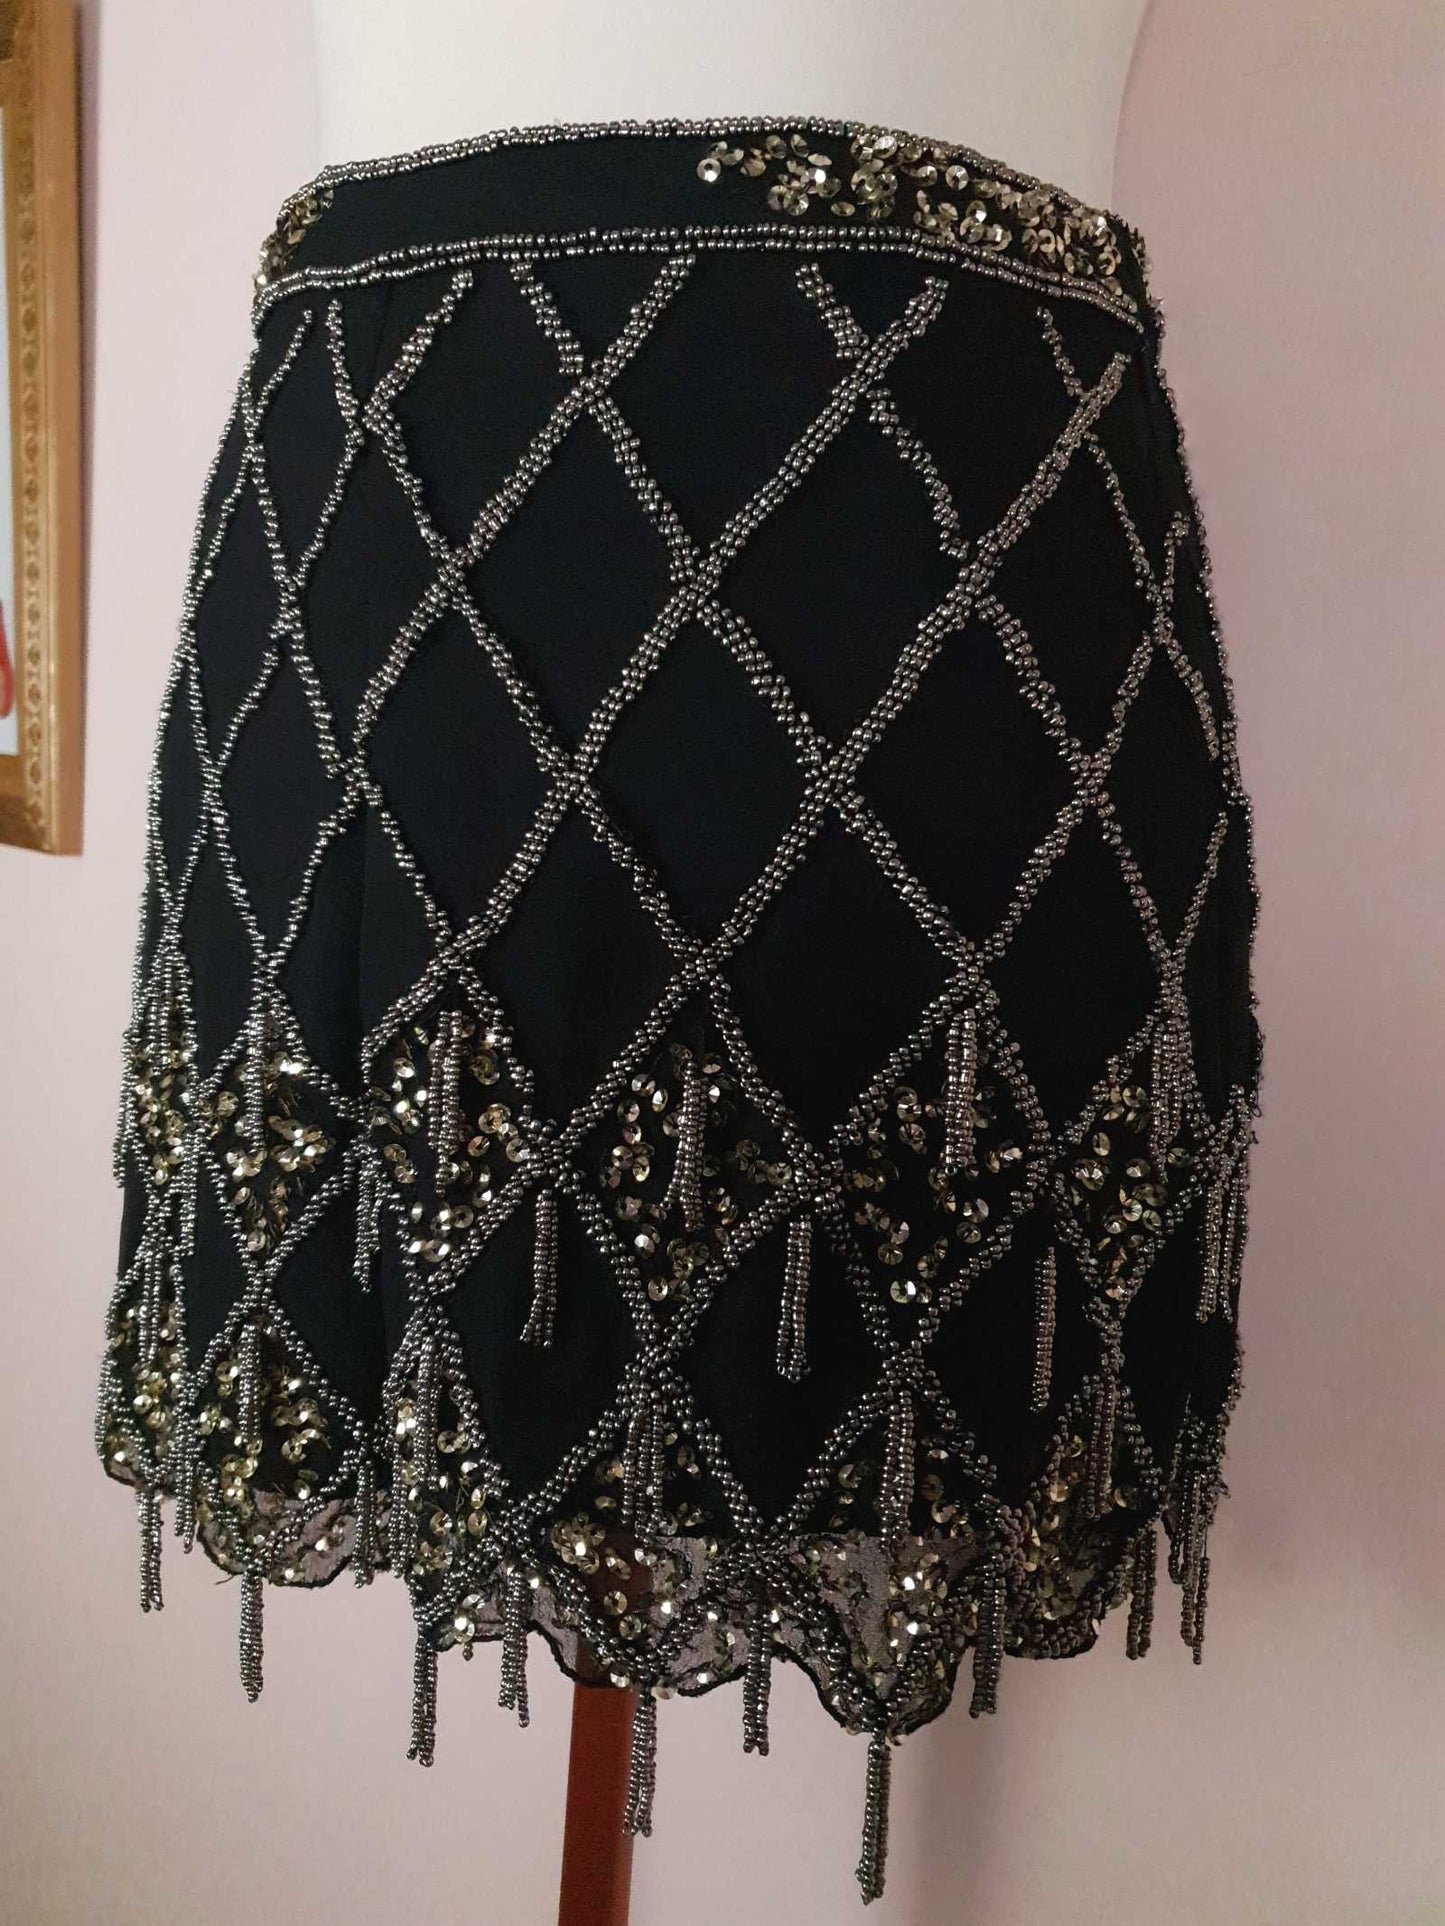 Pre-Owned Black Chiffon Sequin Shorts - Size 8